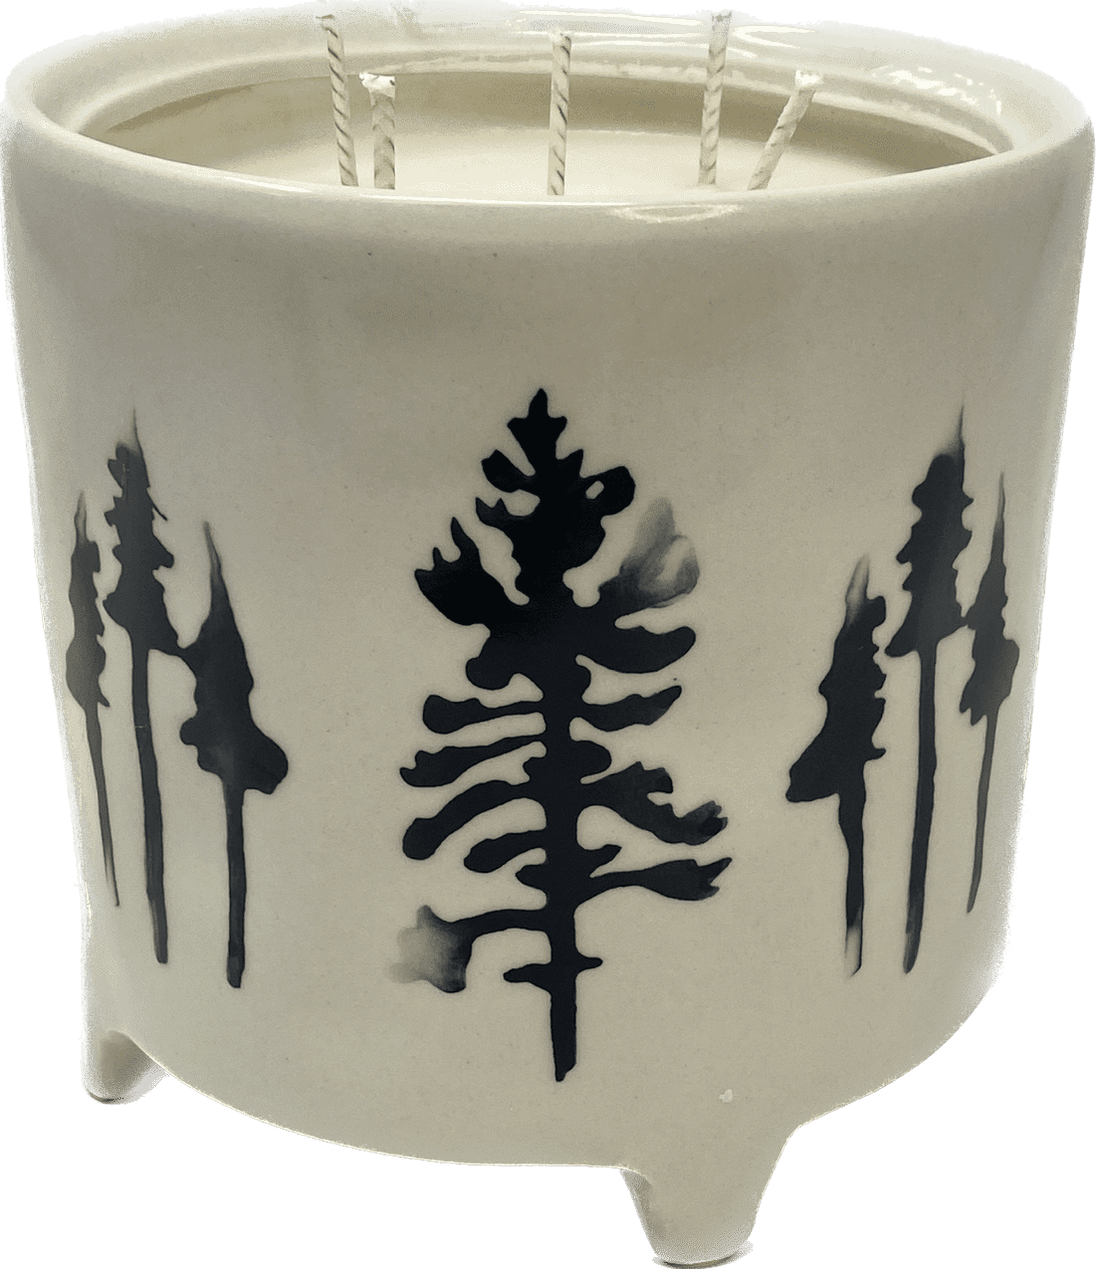 White with Black Pine Tree Design Candle - Fir